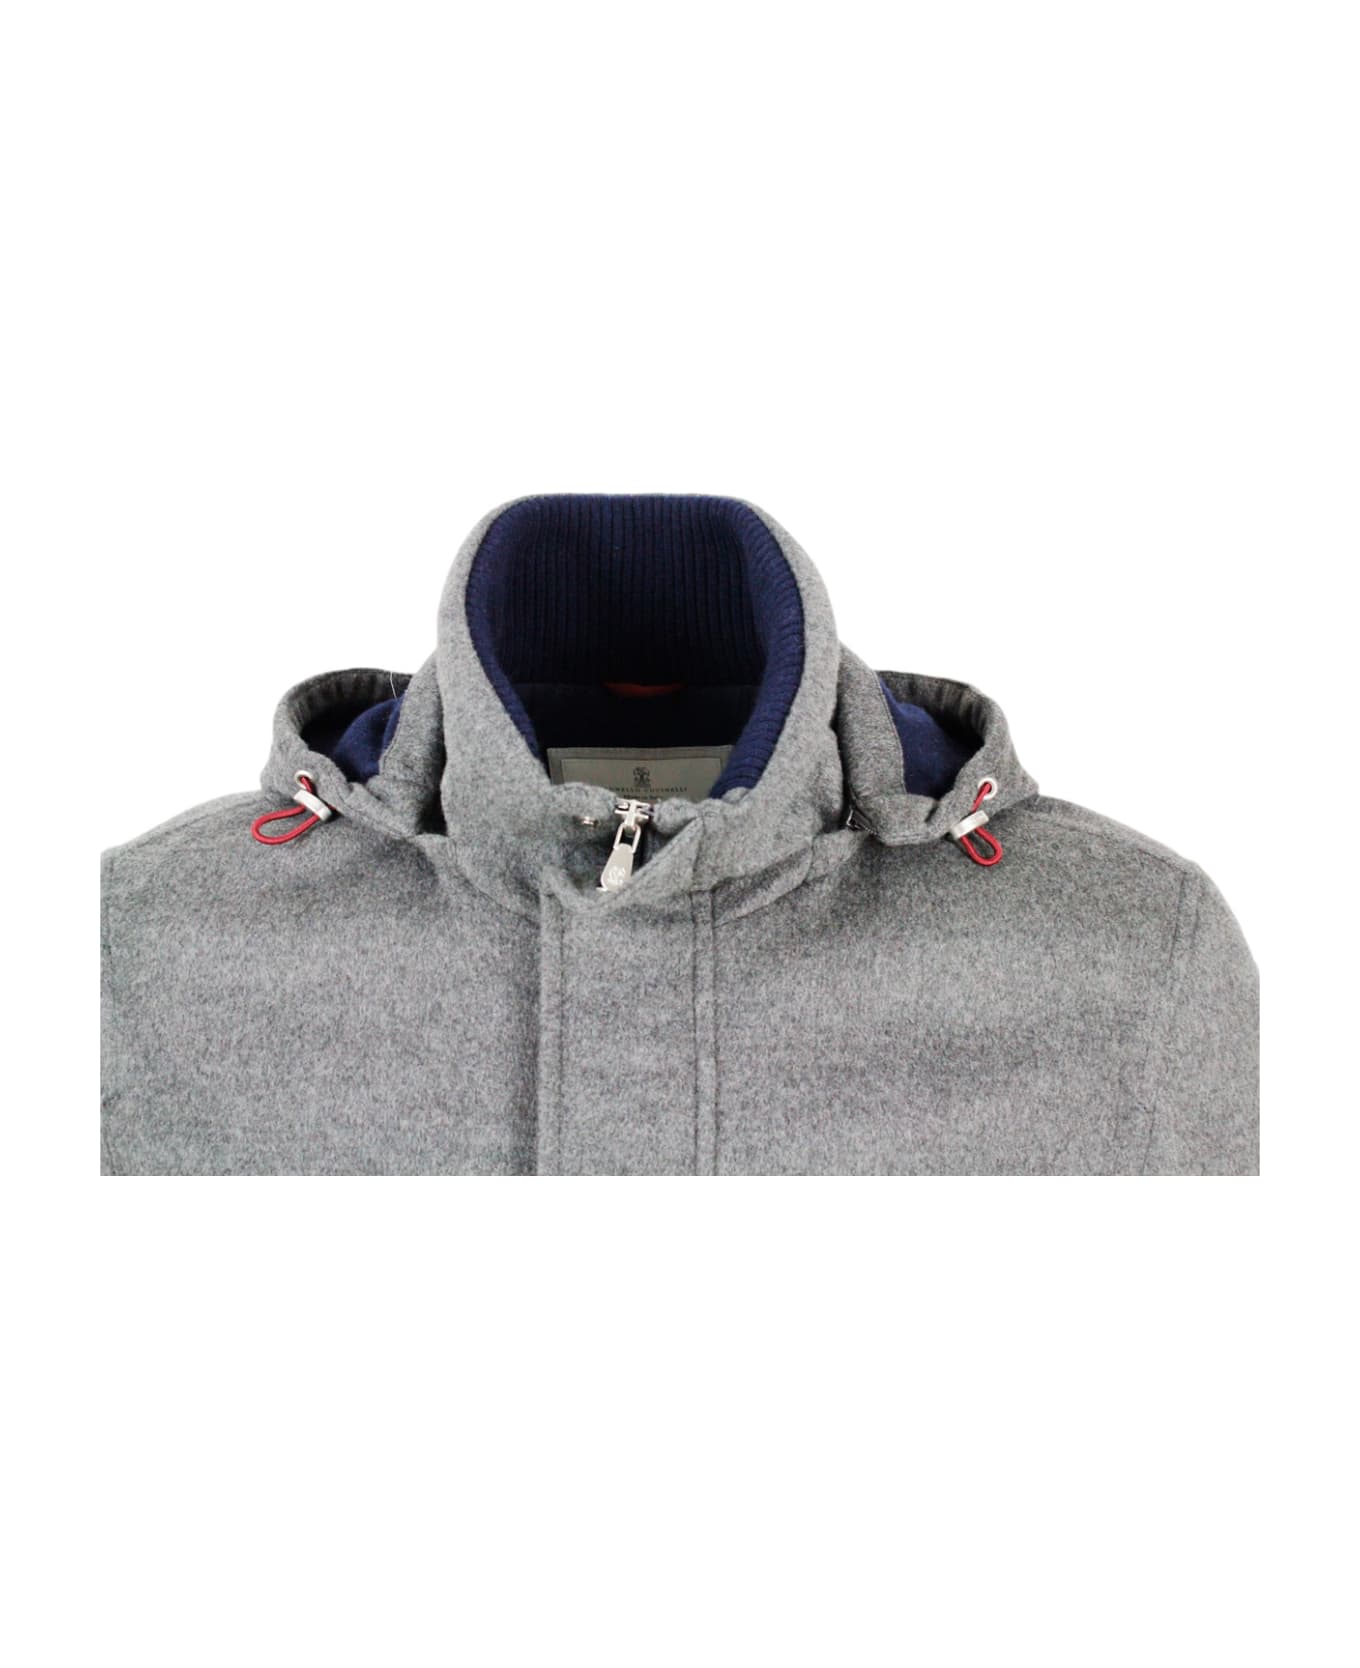 Brunello Cucinelli Cashmere Down Jacket Padded With Real Goose Down With Detachable Hood And Zip And Button Closure - Grey